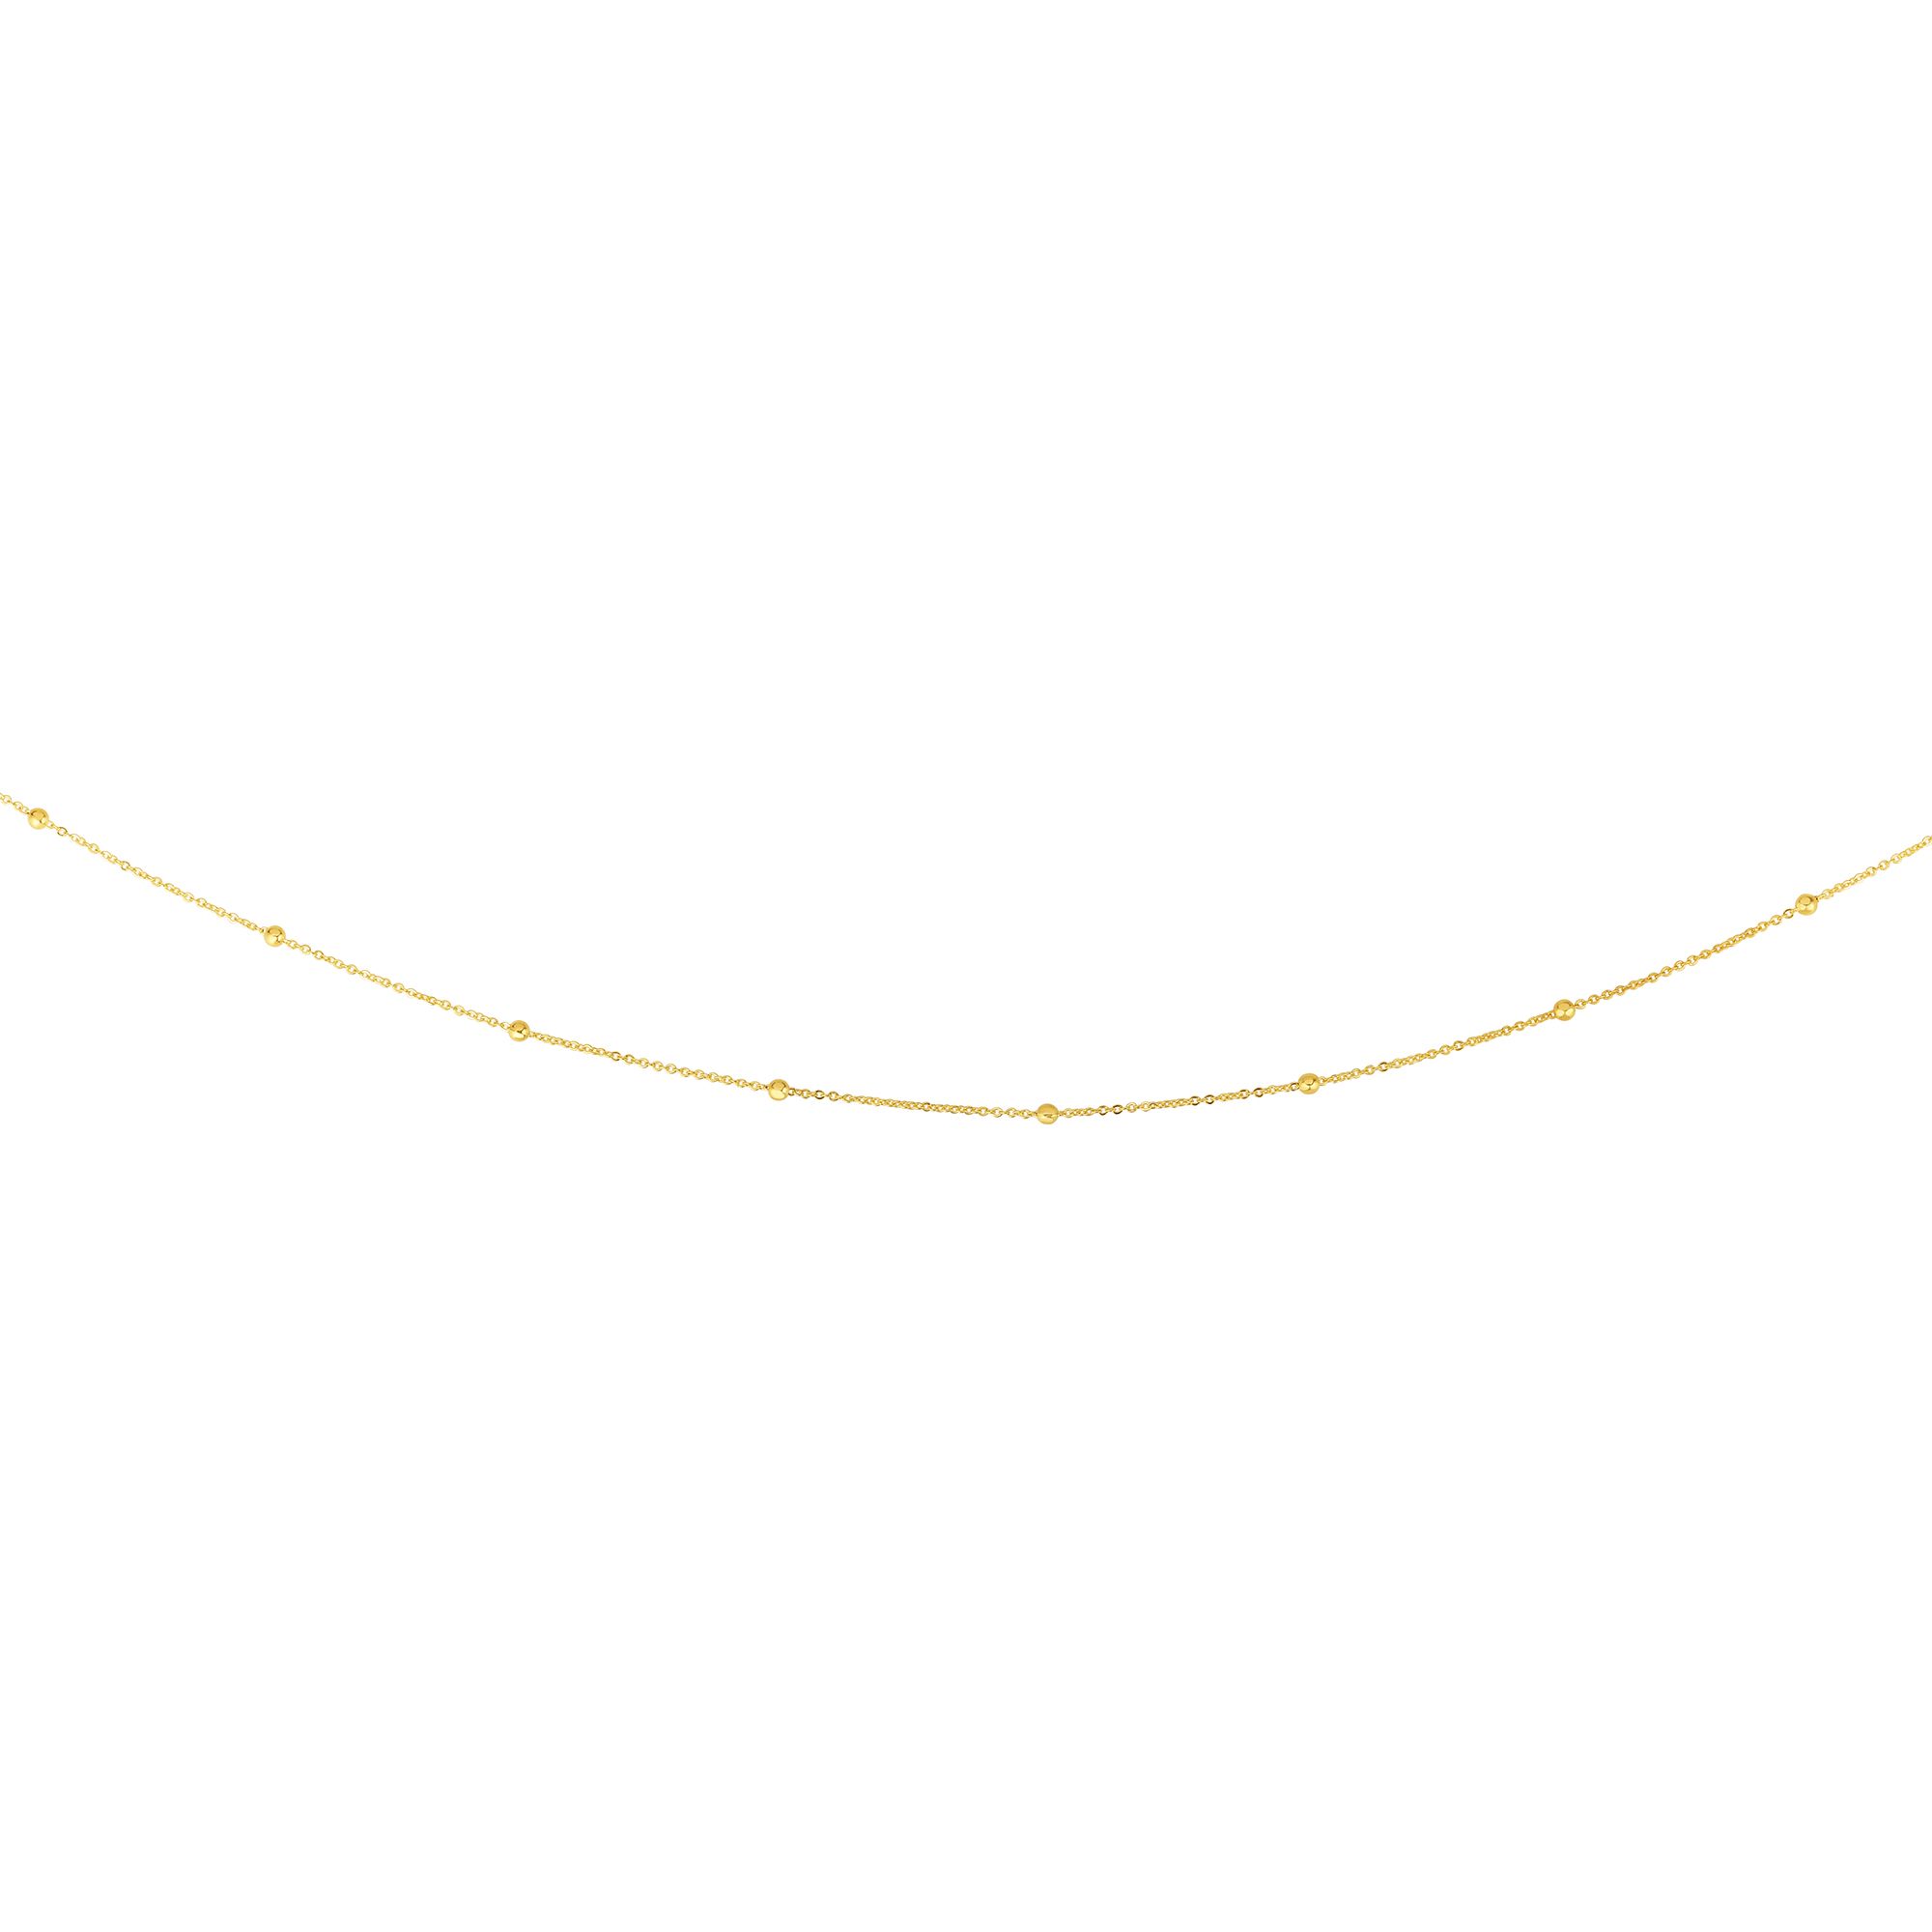 14K Gold 1.8mm Polished Bead Saturn Chain